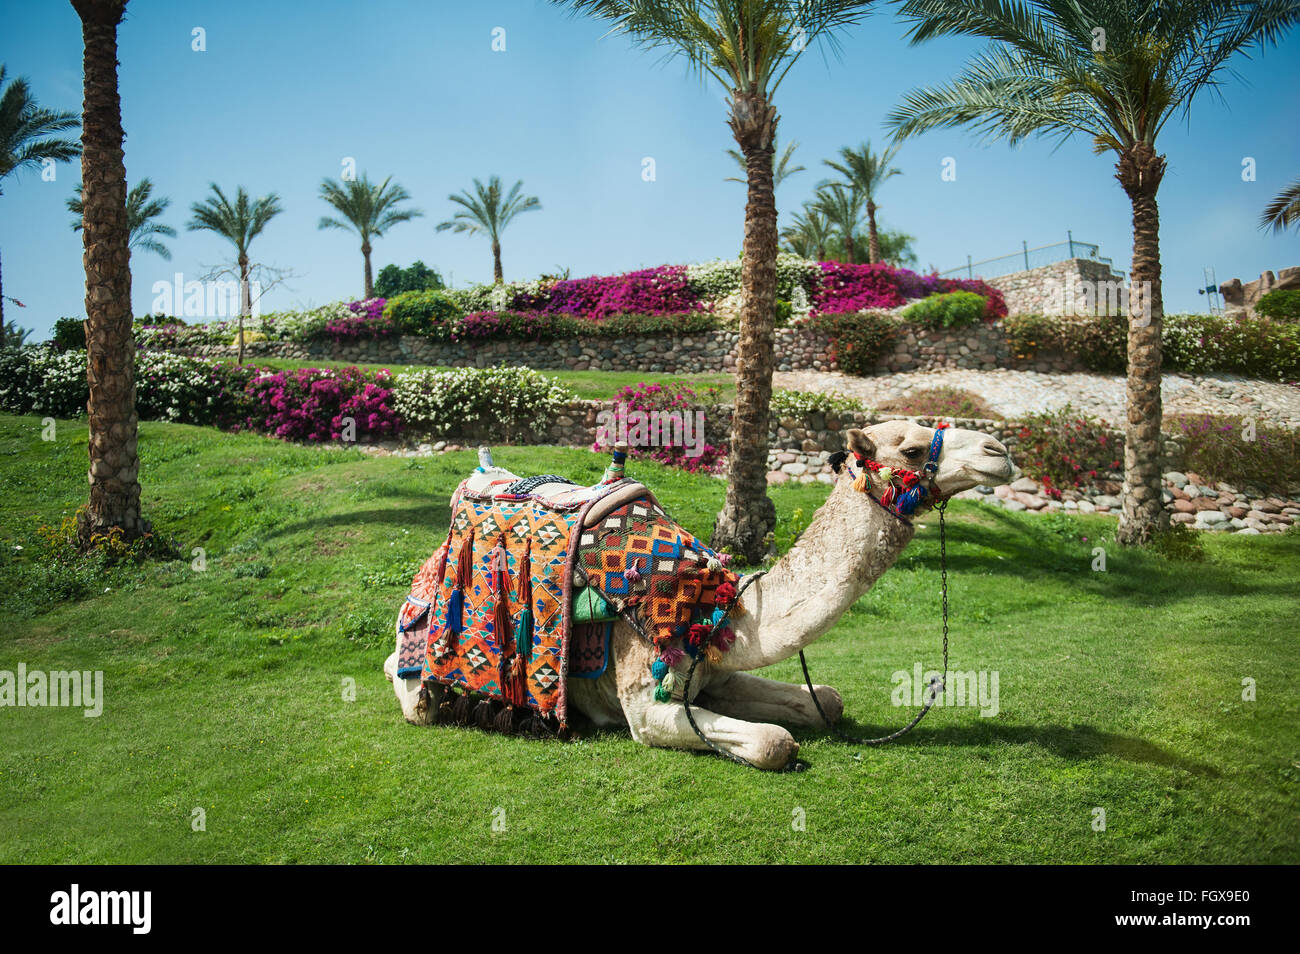 Camel lying on the grass near to palm trees Stock Photo